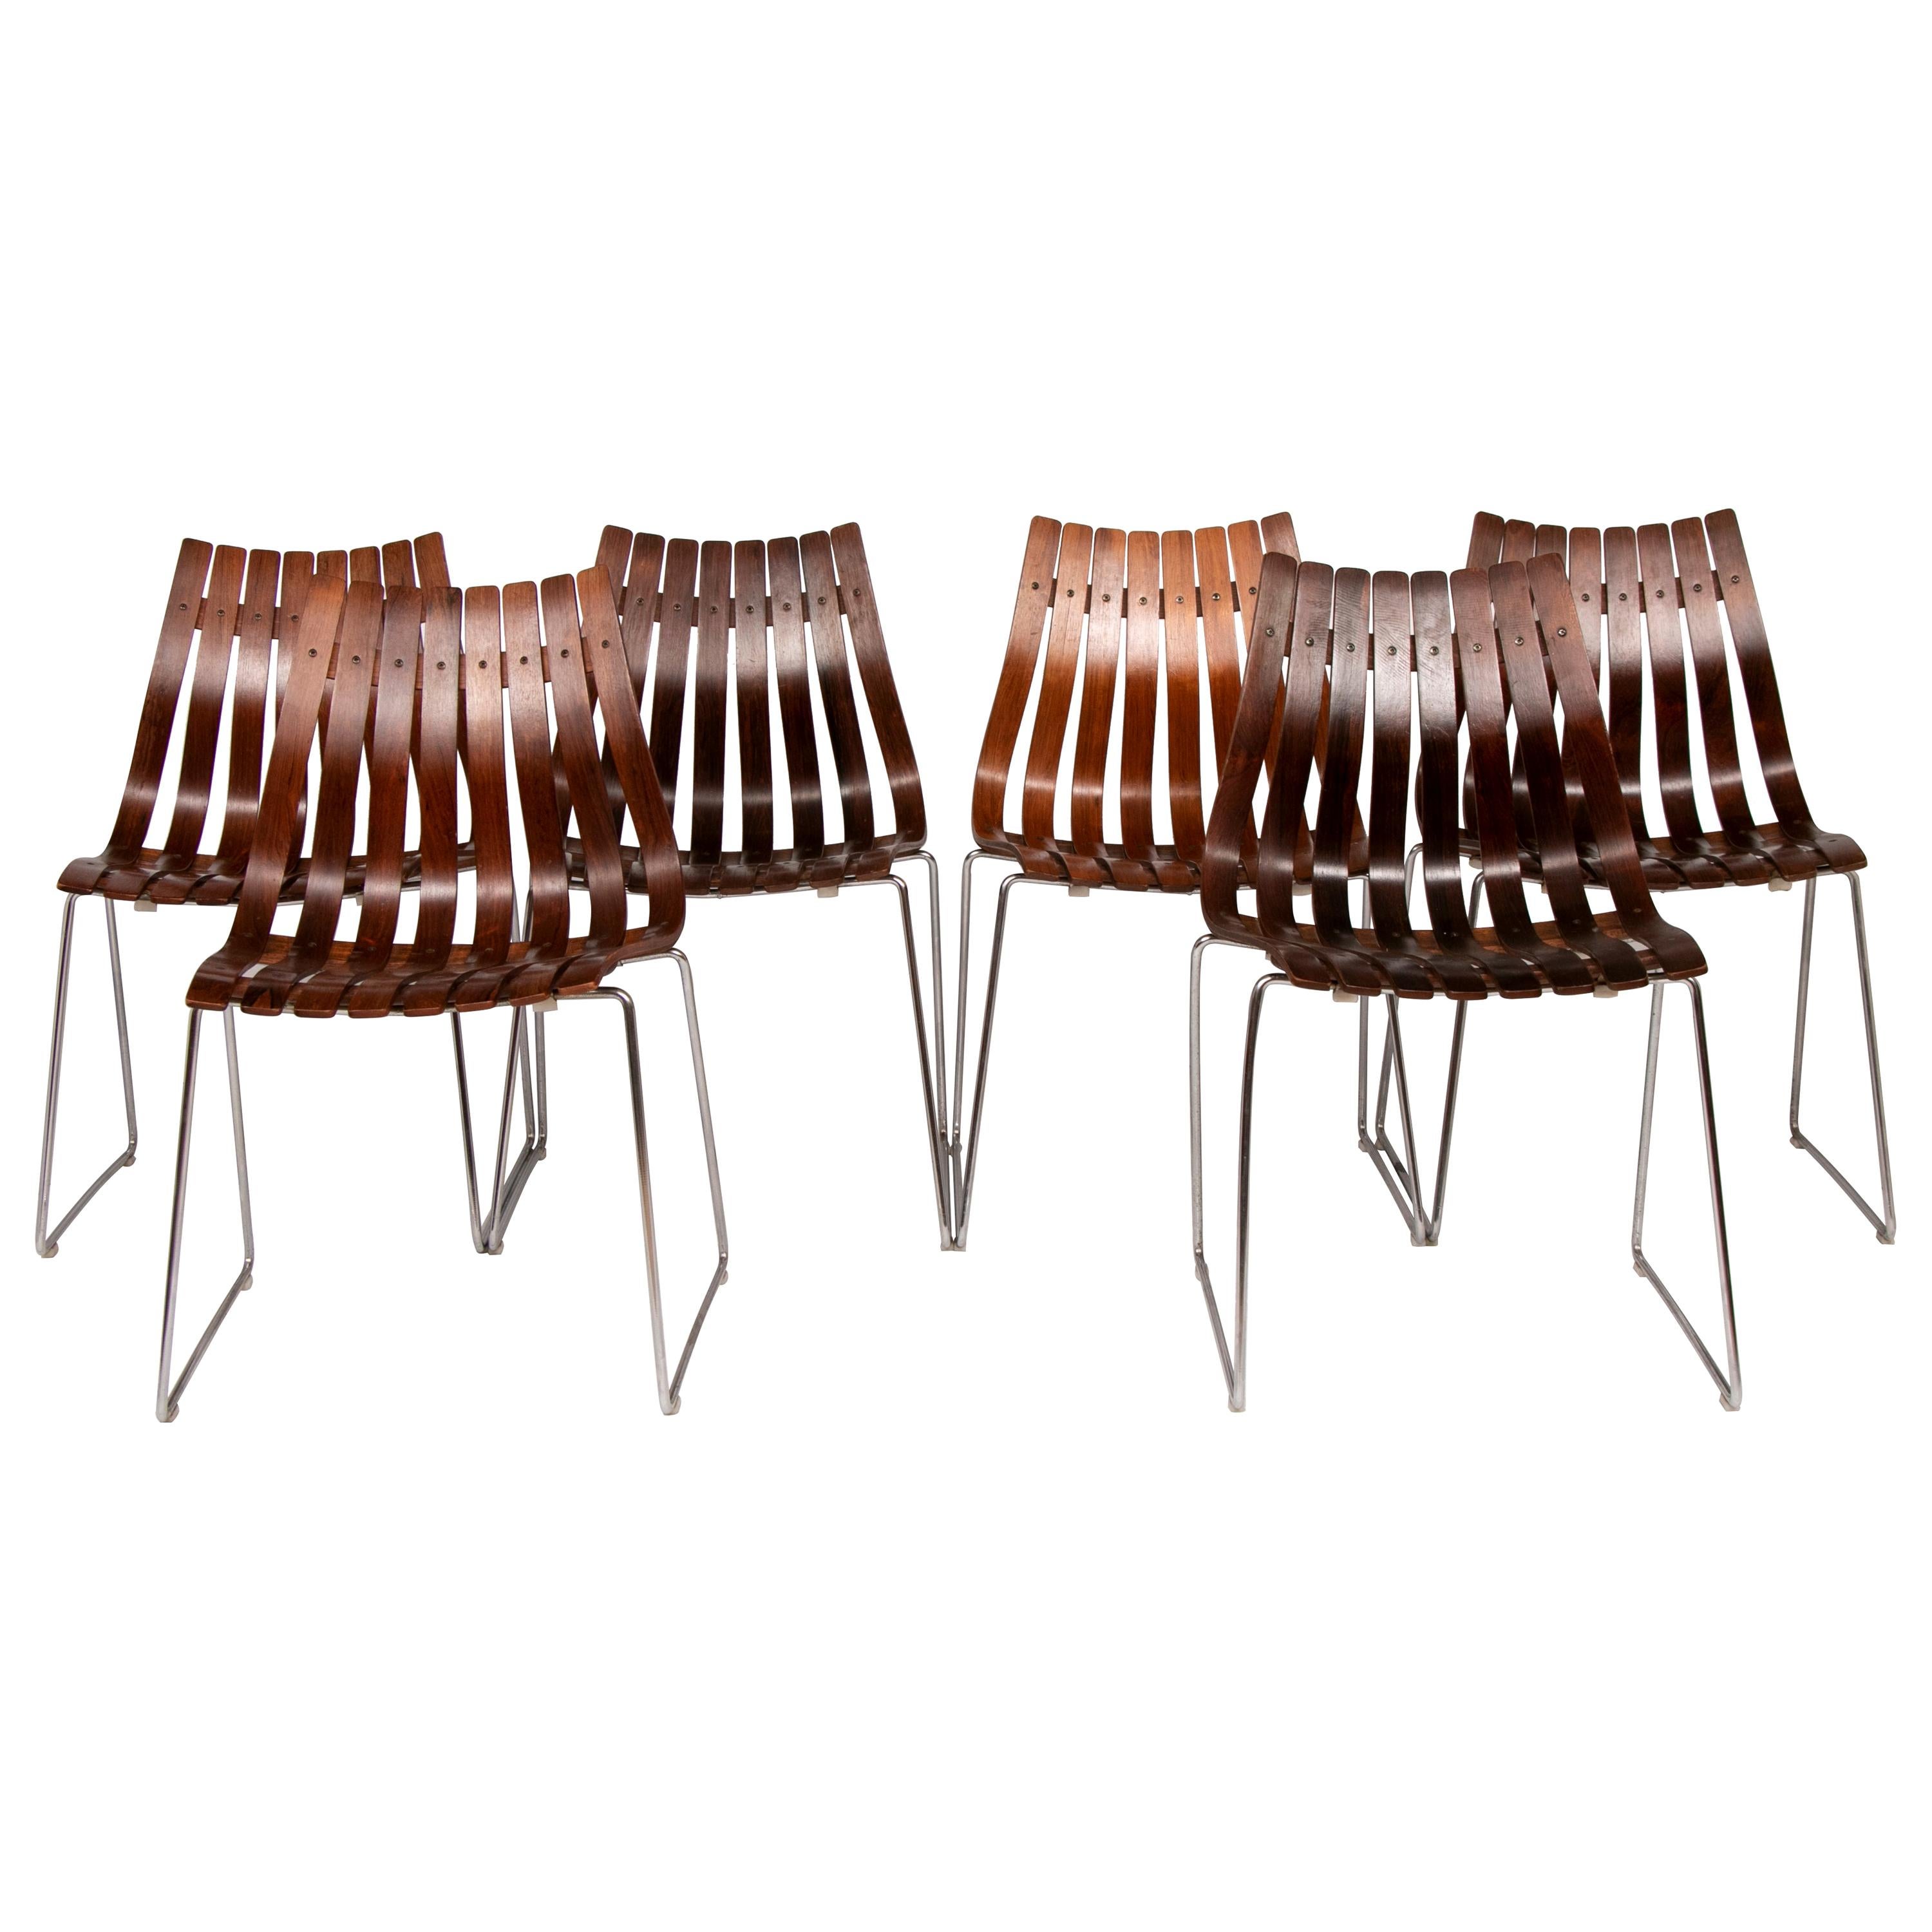 Set of 6 1960s Norwegian Rosewood and Chrome Dining Chairs by Hans Brattrud